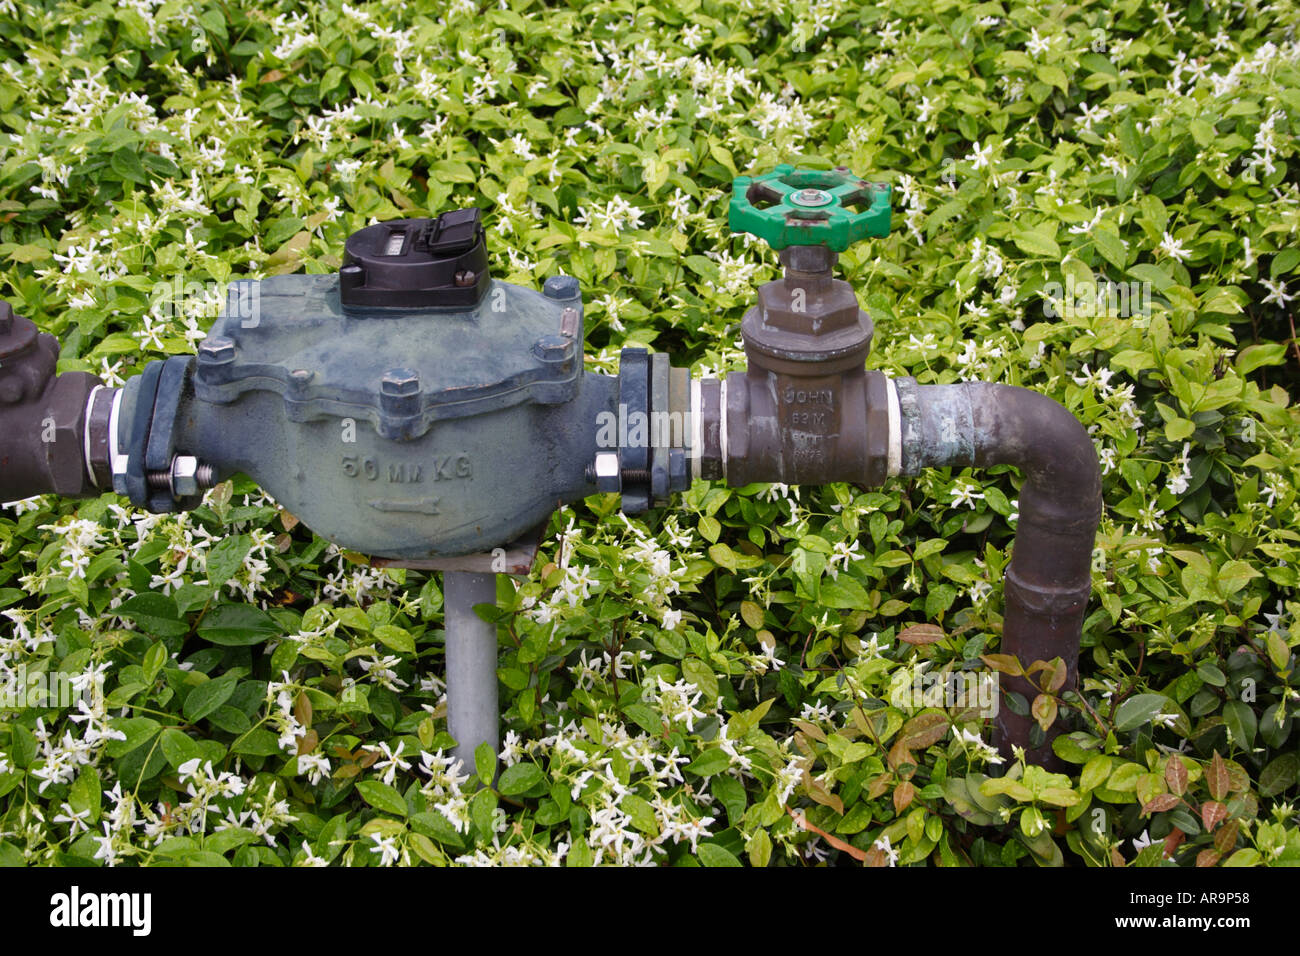 WATER METER AND TAP Stock Photo - Alamy